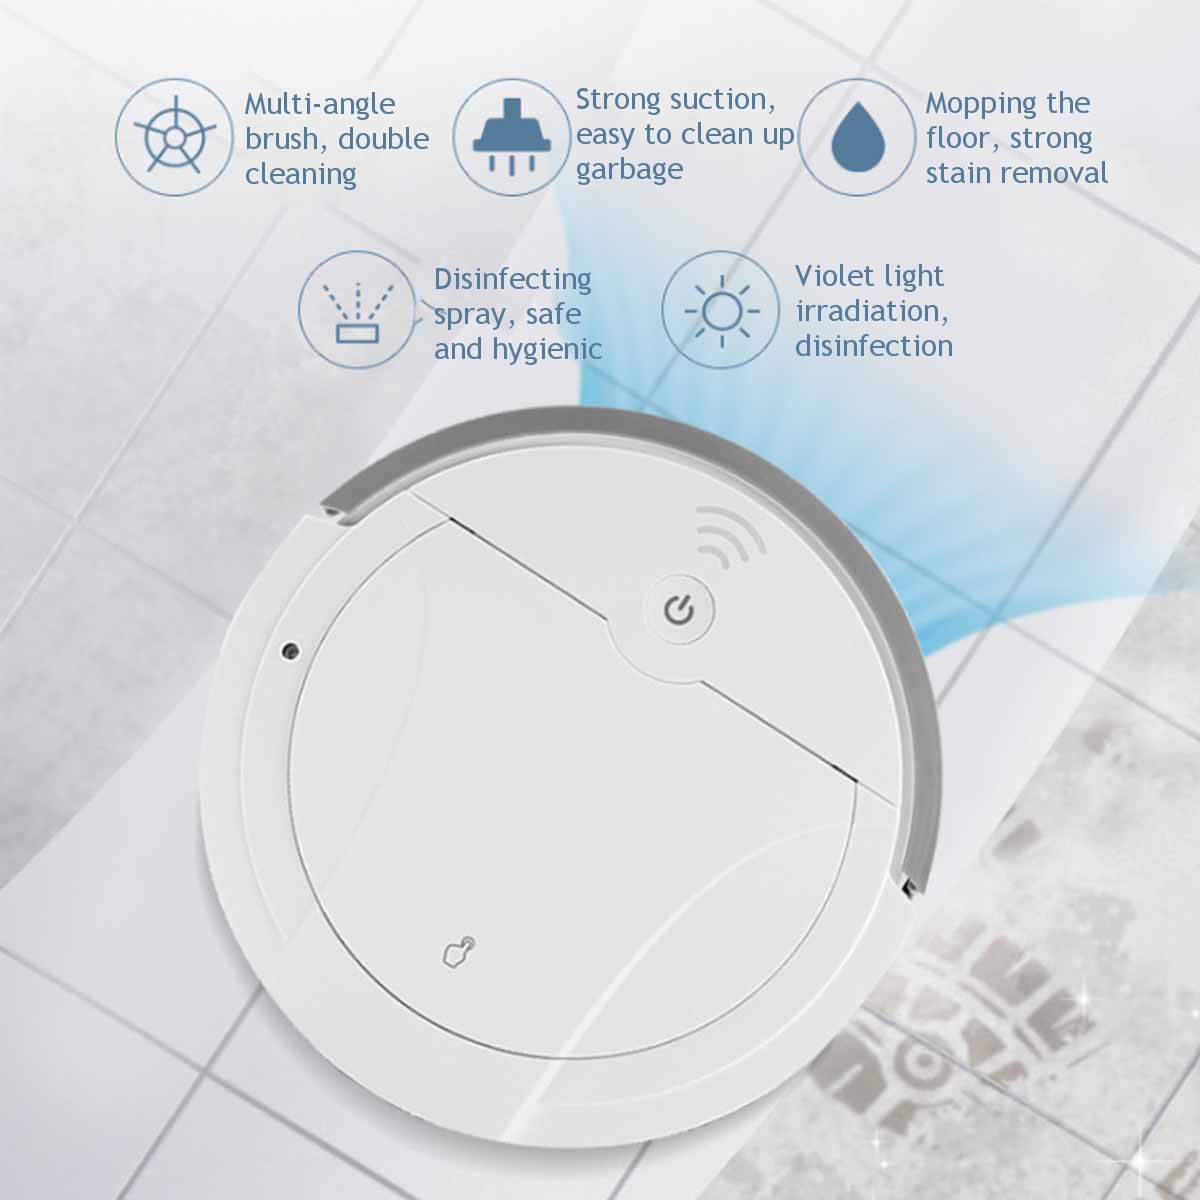 5-in-1 Fully Automatic Multifunctional Smart Robot Vacuum Cleaner USB Charging Sweeping Robot Dry/Wet UV Disinfection Cleaner